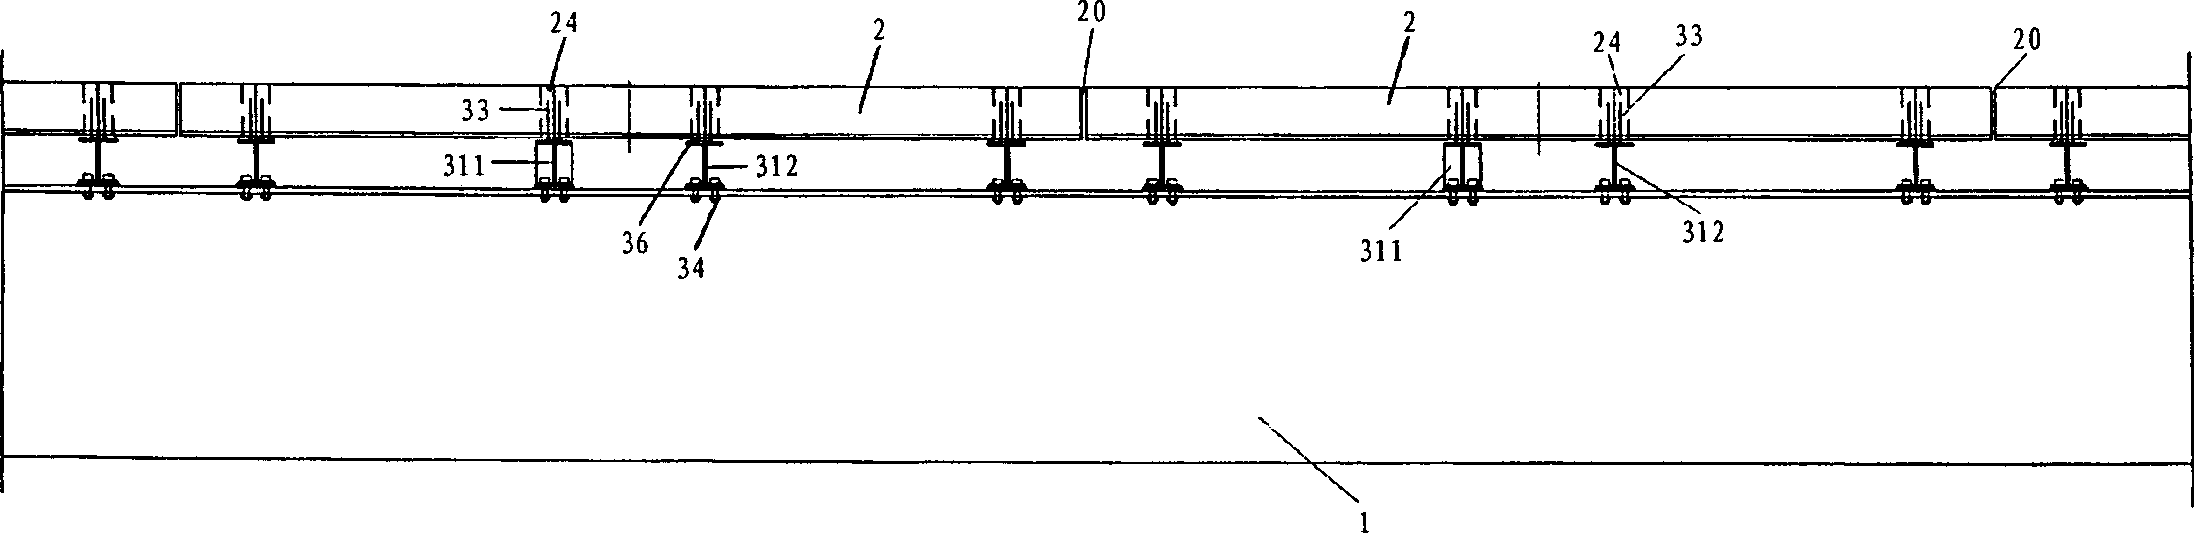 Rail structure of high-speed rail transportation